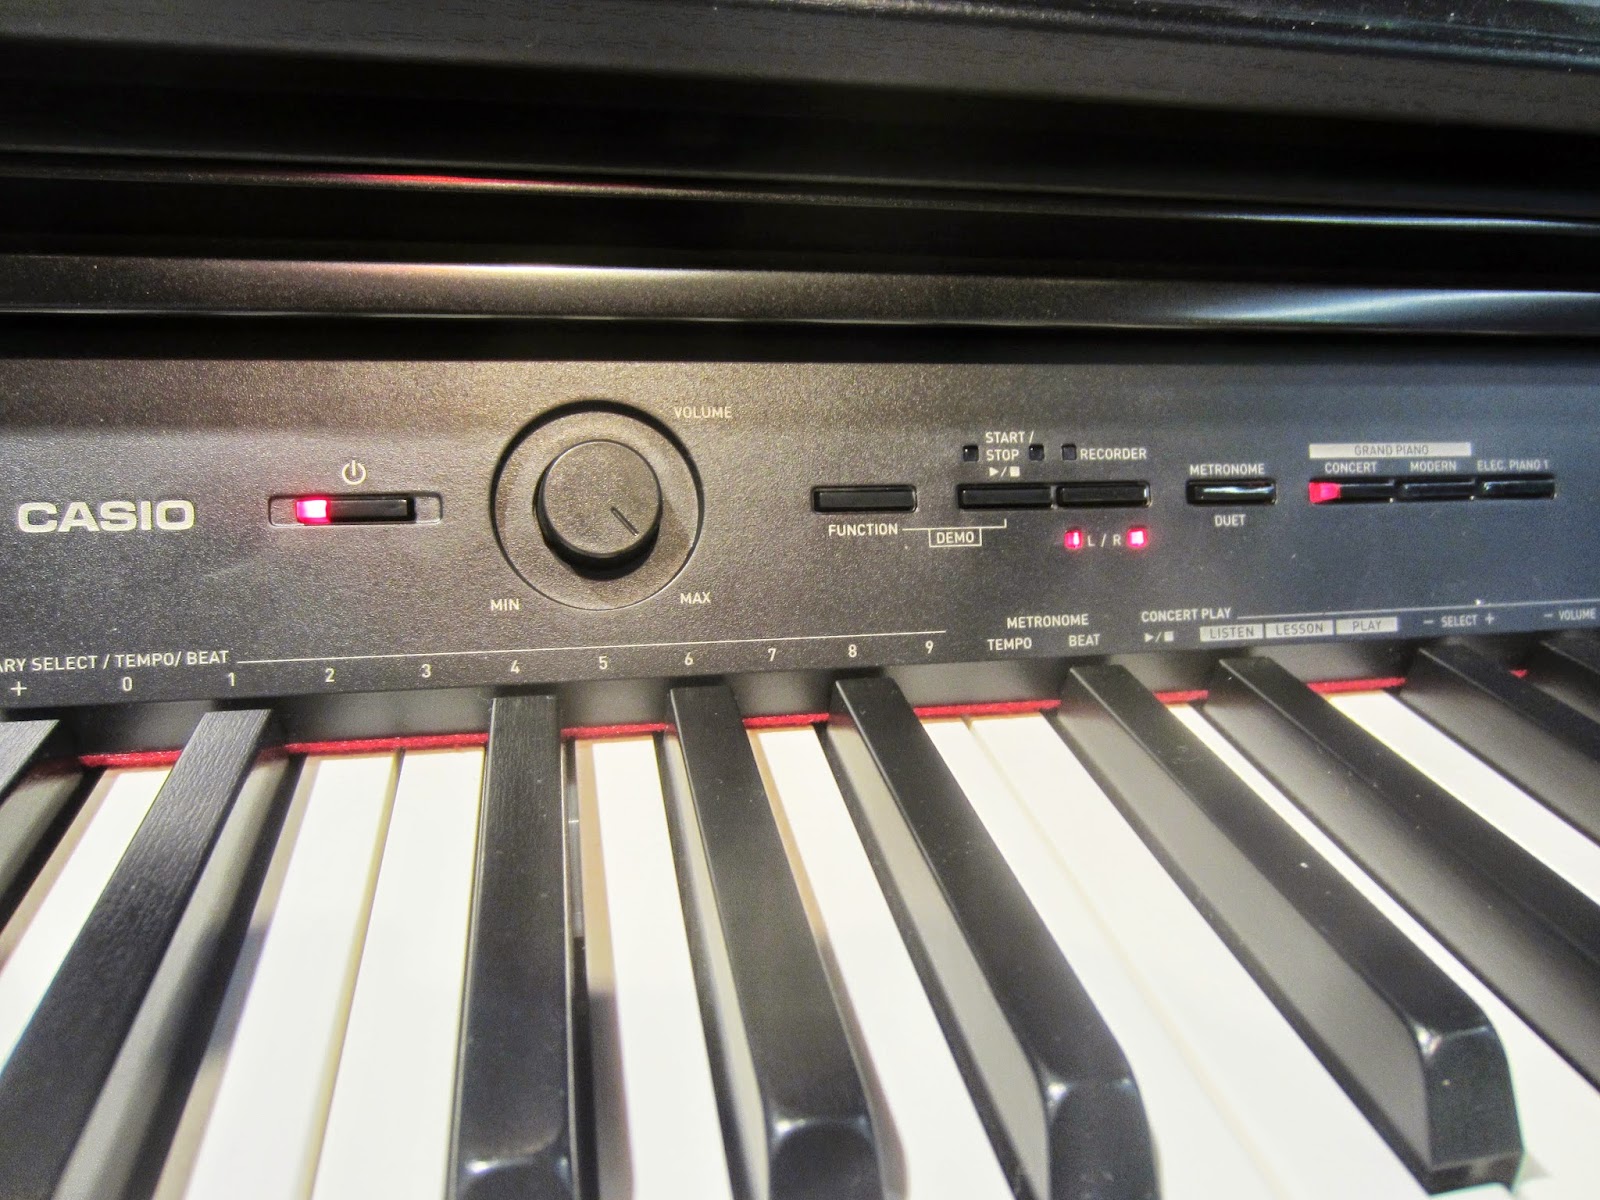 REVIEW - Casio PX760 Digital Piano - Recommended